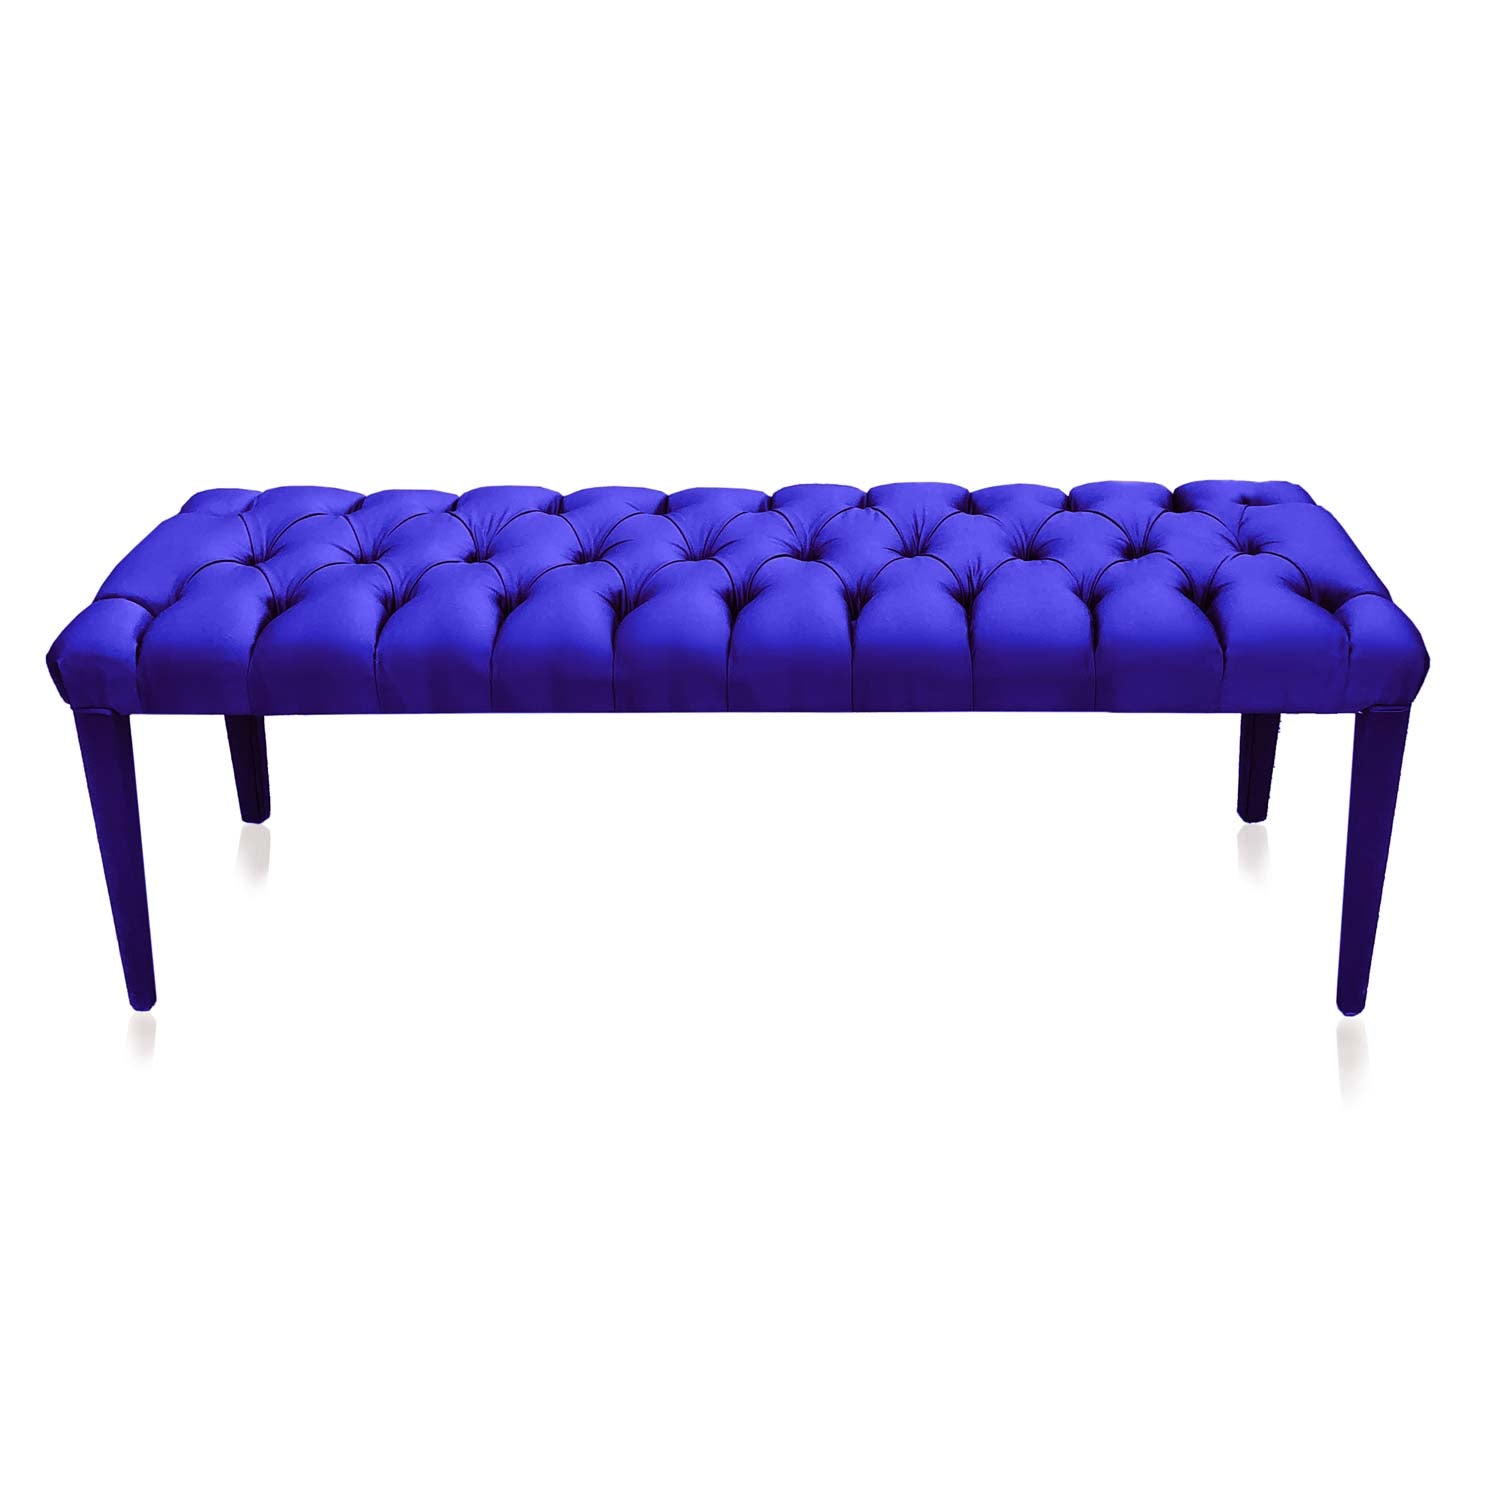 Transform Your Space with Elegance. ottoman bench in electric blue.